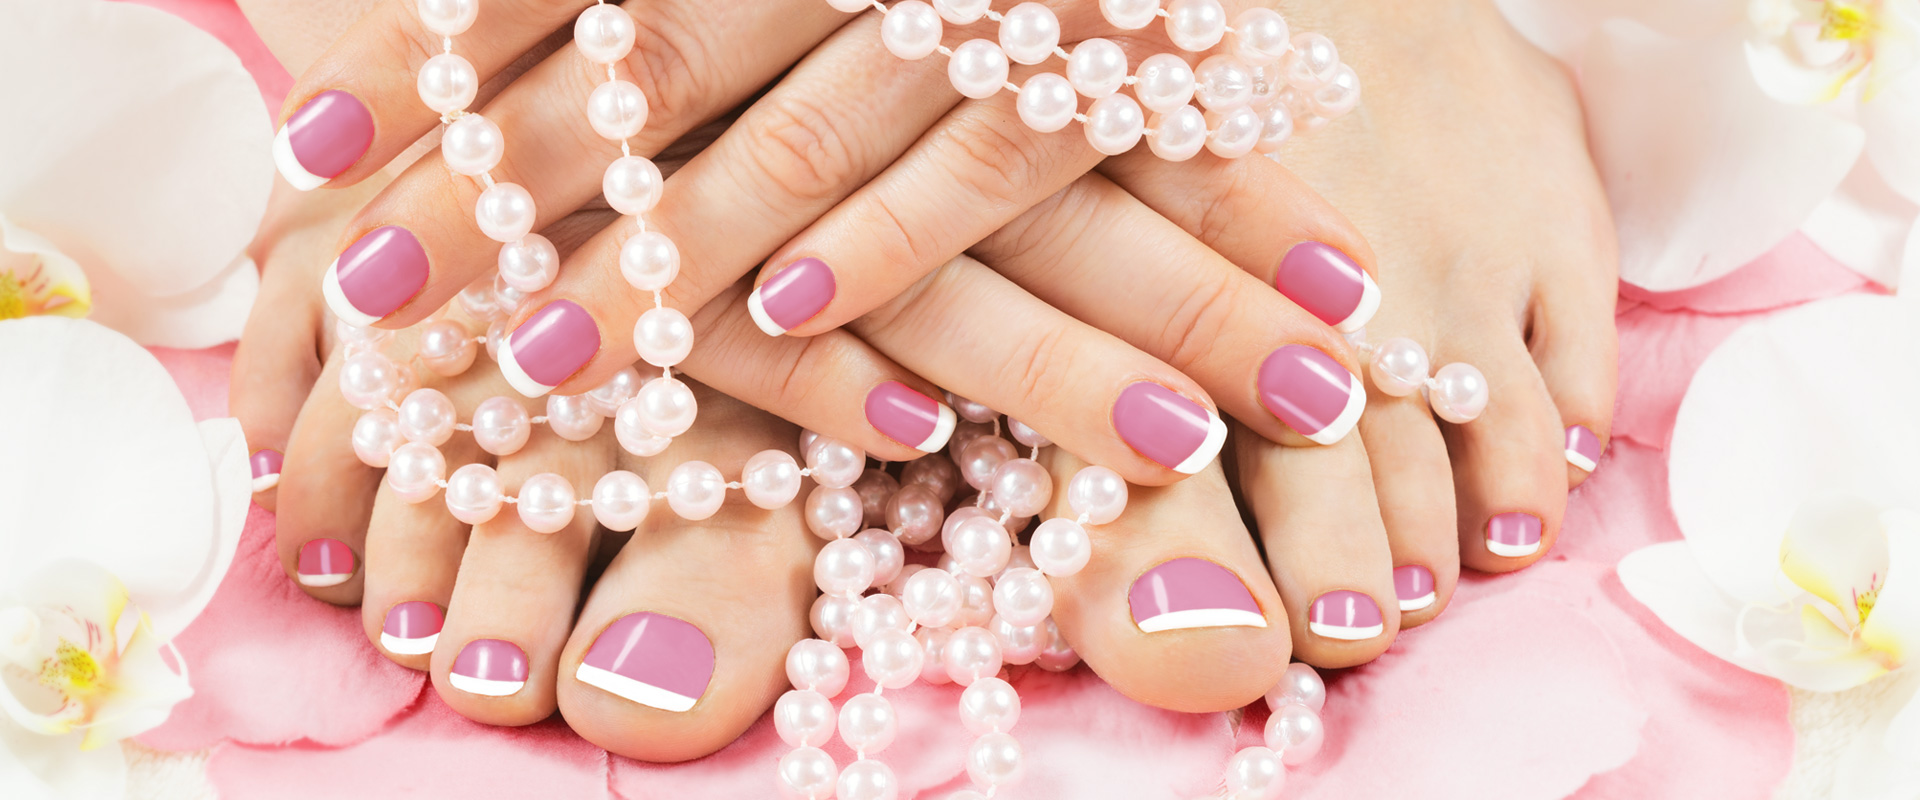 Paleis specificatie Scenario Manicure – Pedicure For Her - SiSi Nail Spa